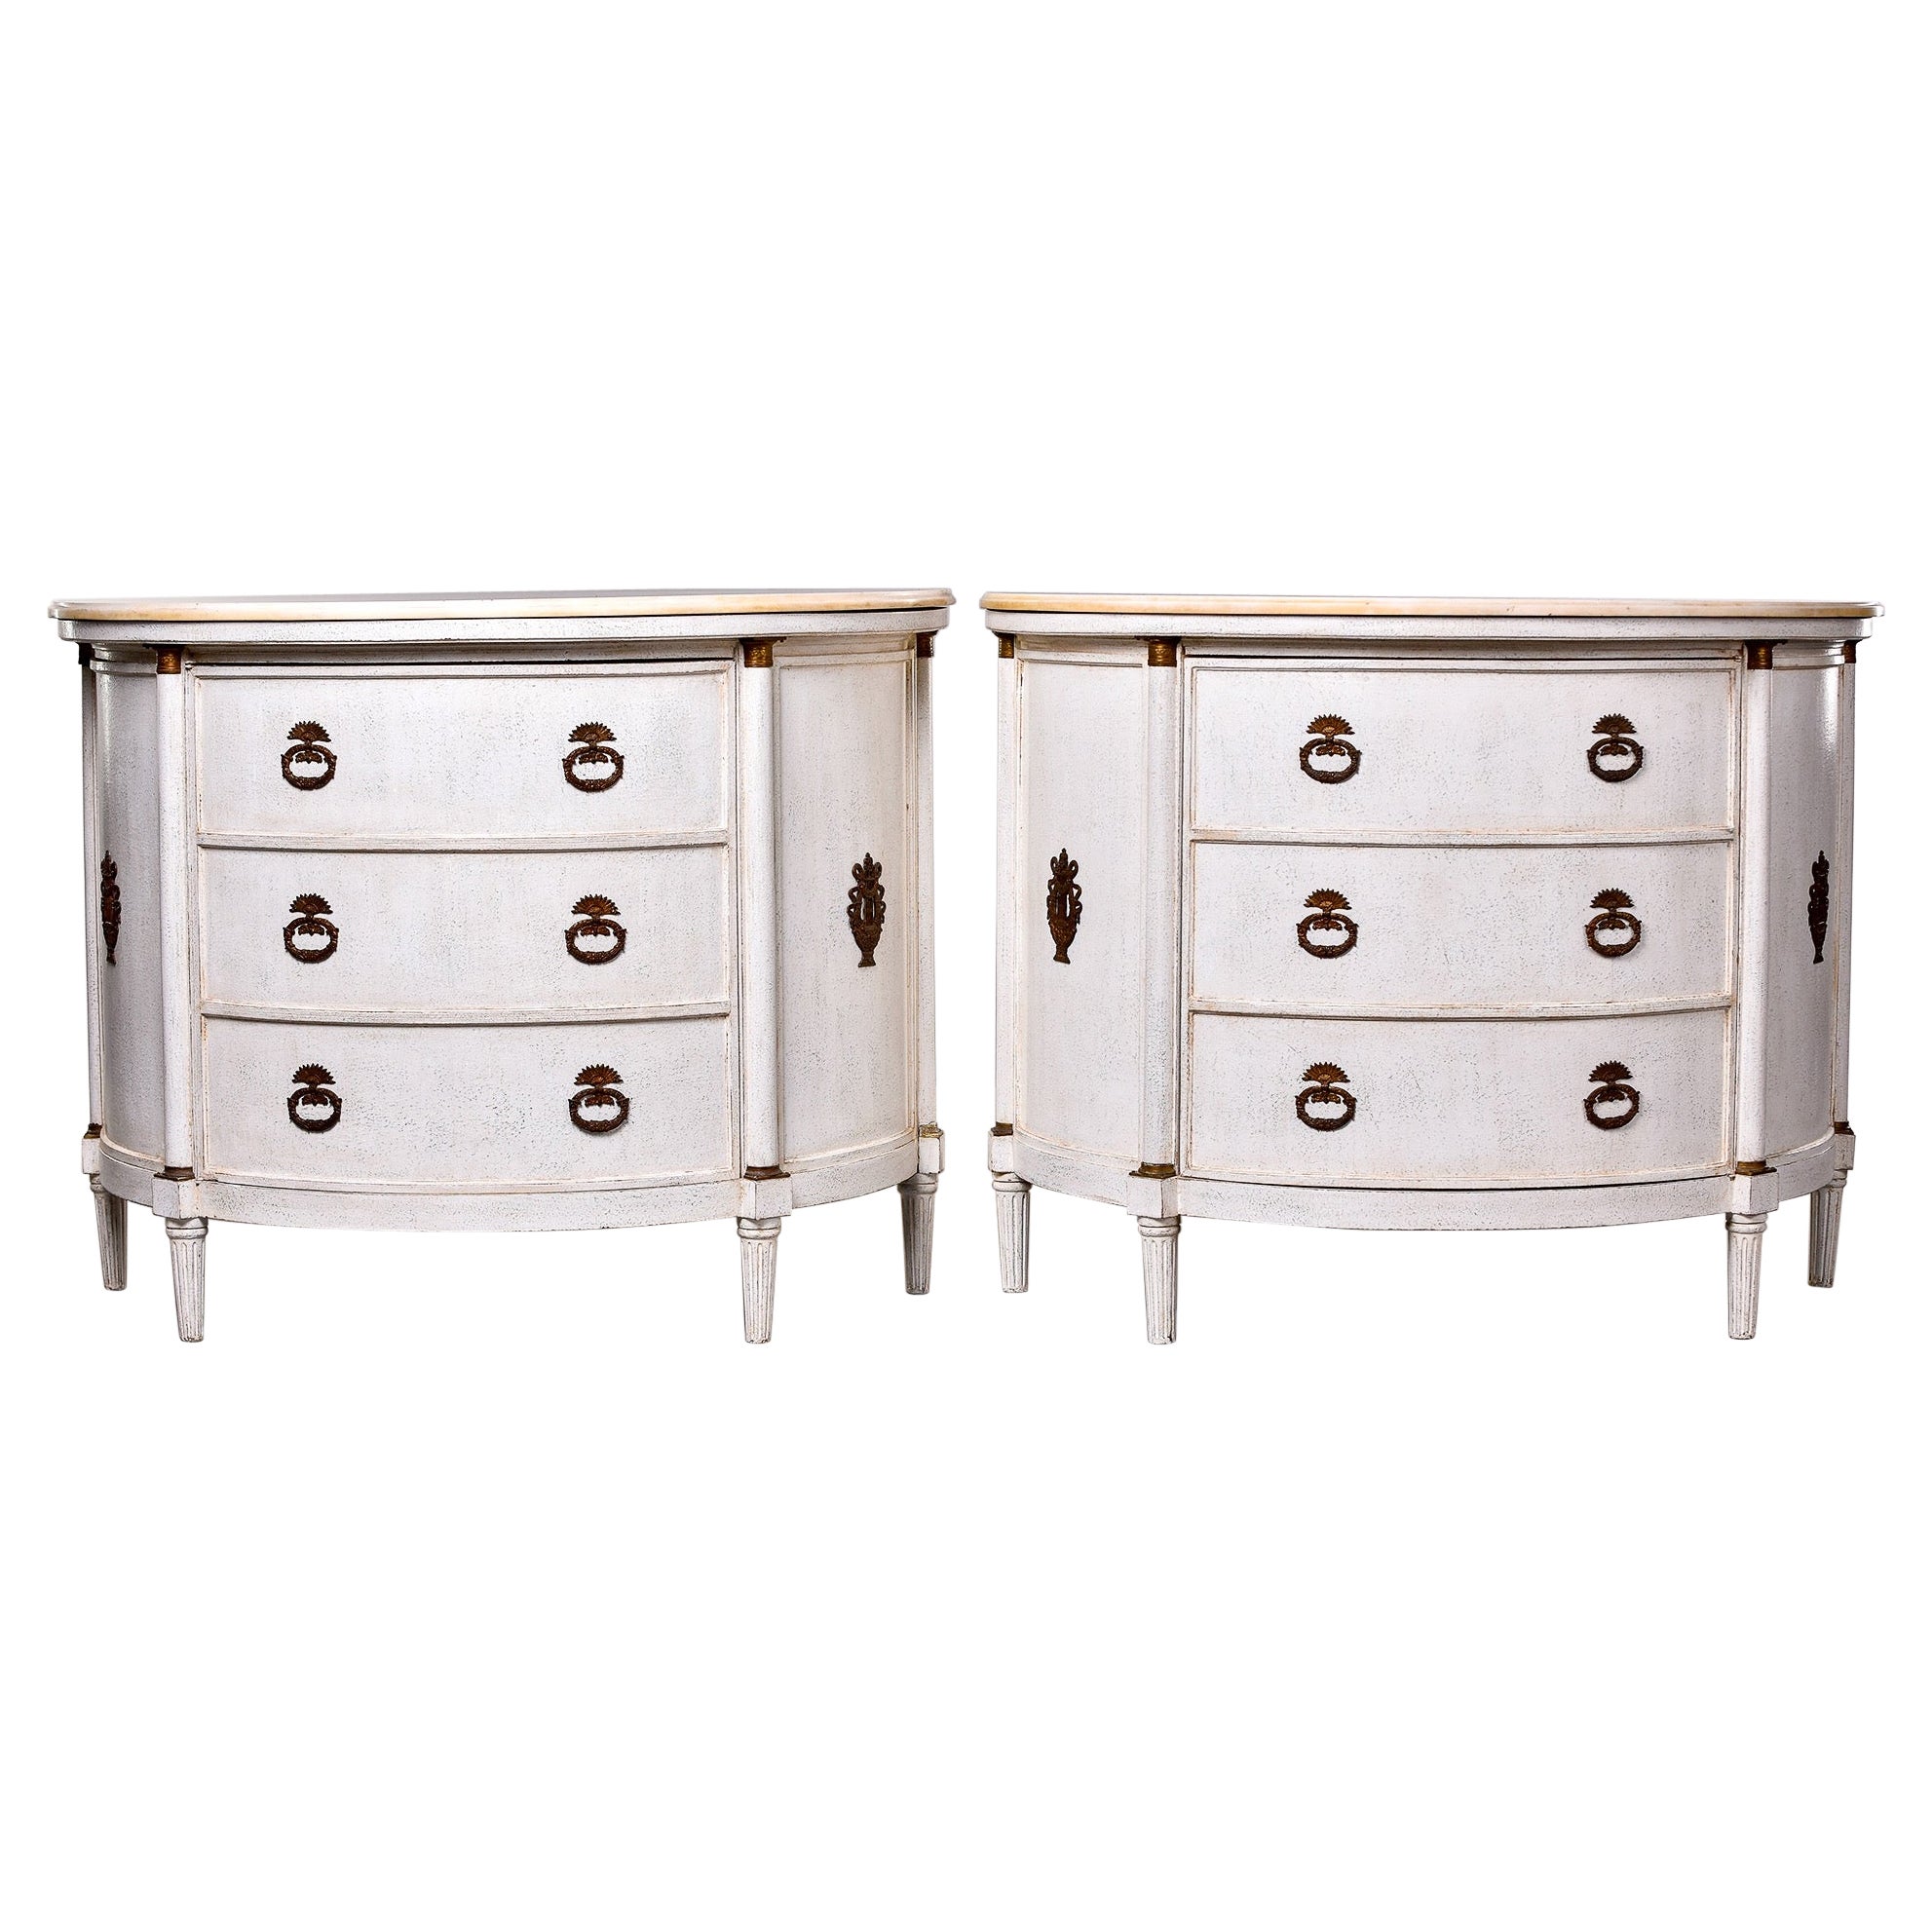 Pair of Pine Regency Style Demilune Cabinets with White Marble Tops